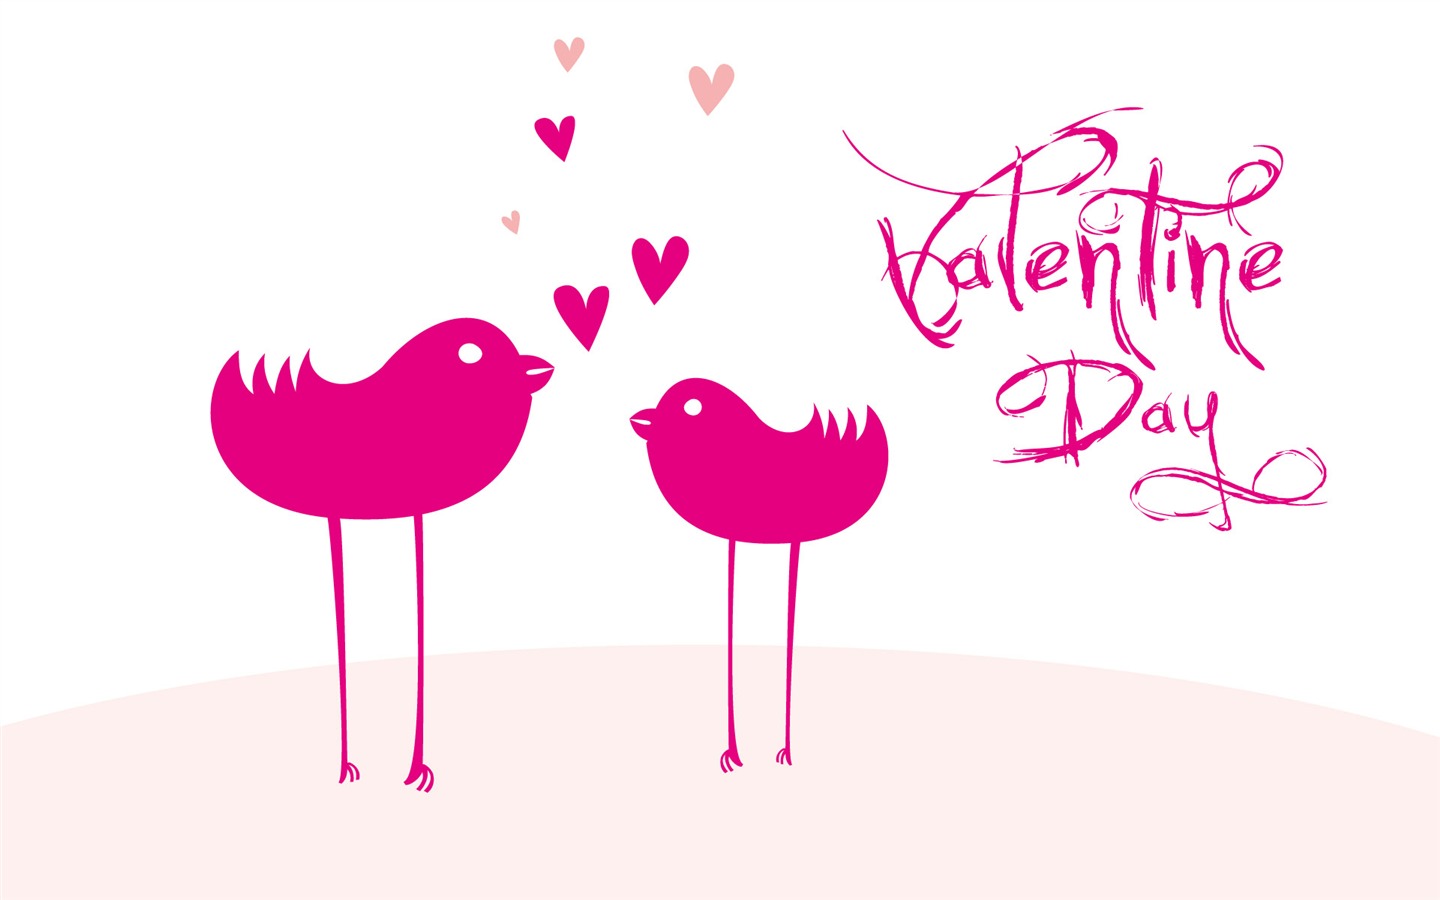 Valentine's Day Love Theme Wallpapers #37 - 1440x900